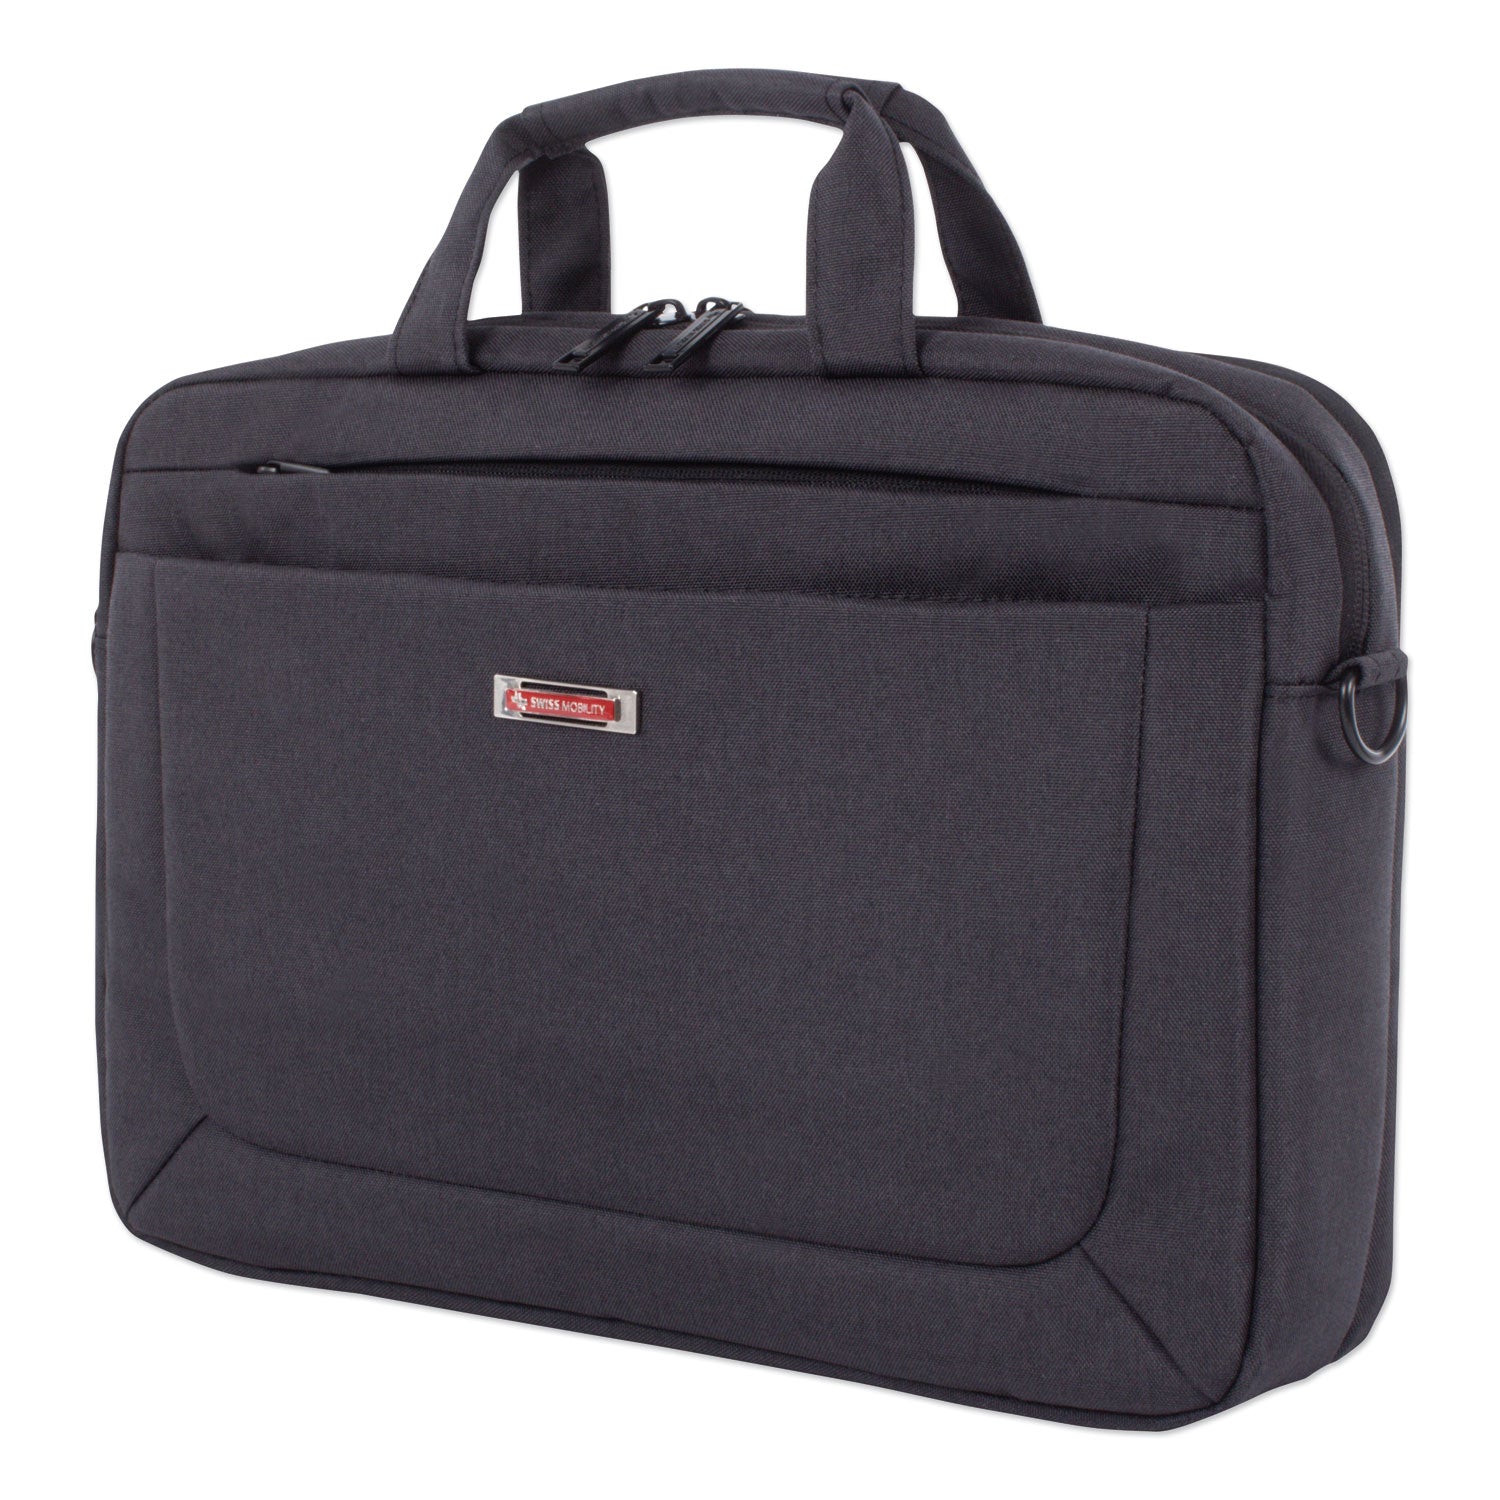 cadence-2-section-briefcase-fits-devices-up-to-156-polyester-45-x-45-x-16-charcoal_swzexb1009smch - 1